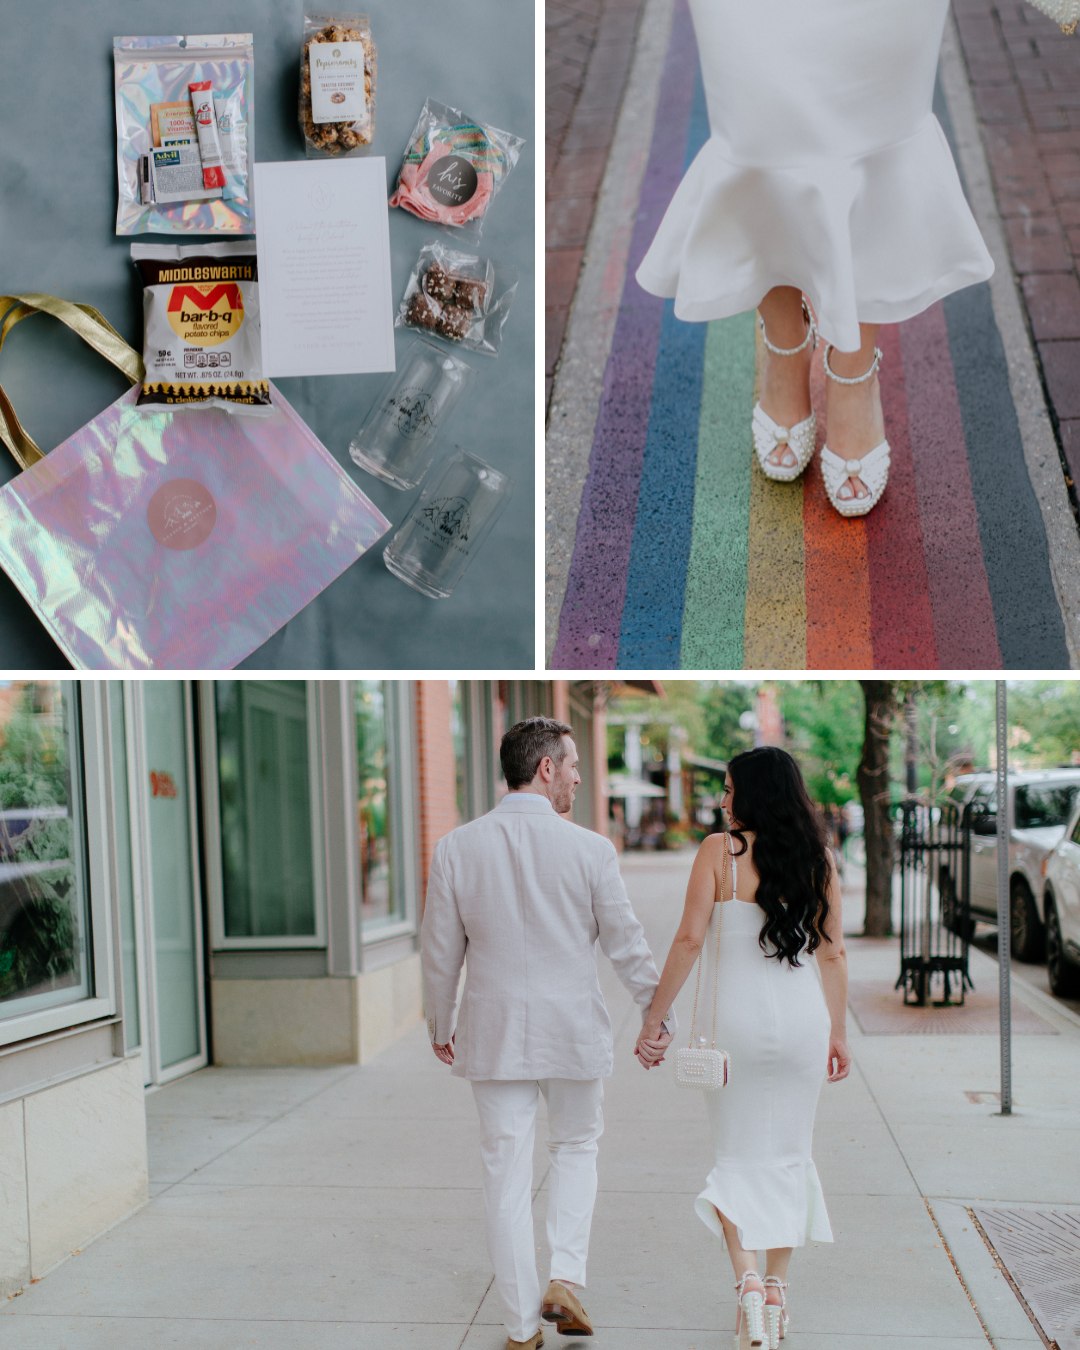 welcome gift contents, bride's Jimmy Choo's on rainbow crosswalk, couple walking hand-in-hand